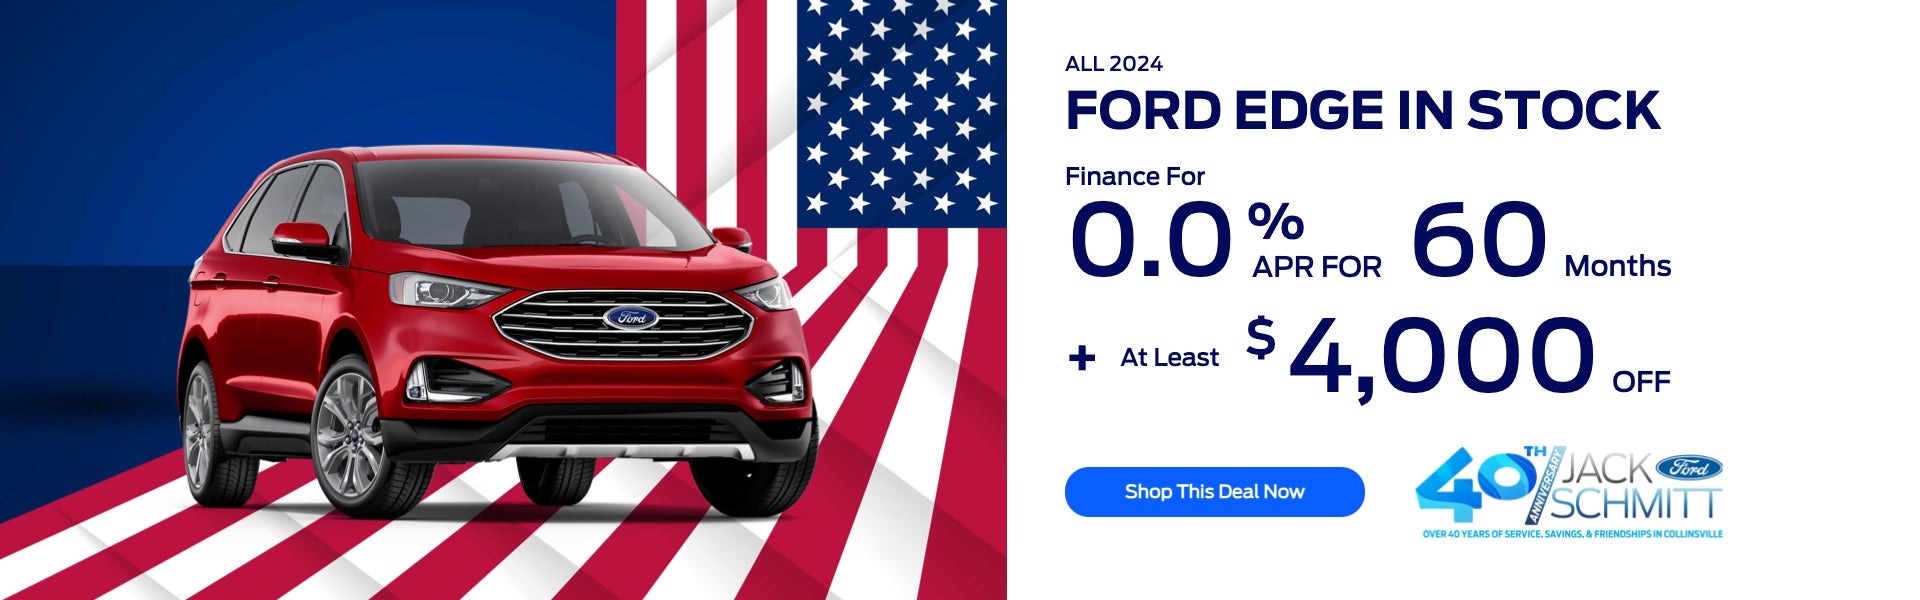 ALL 2024 FORD EDGE IN STOCK